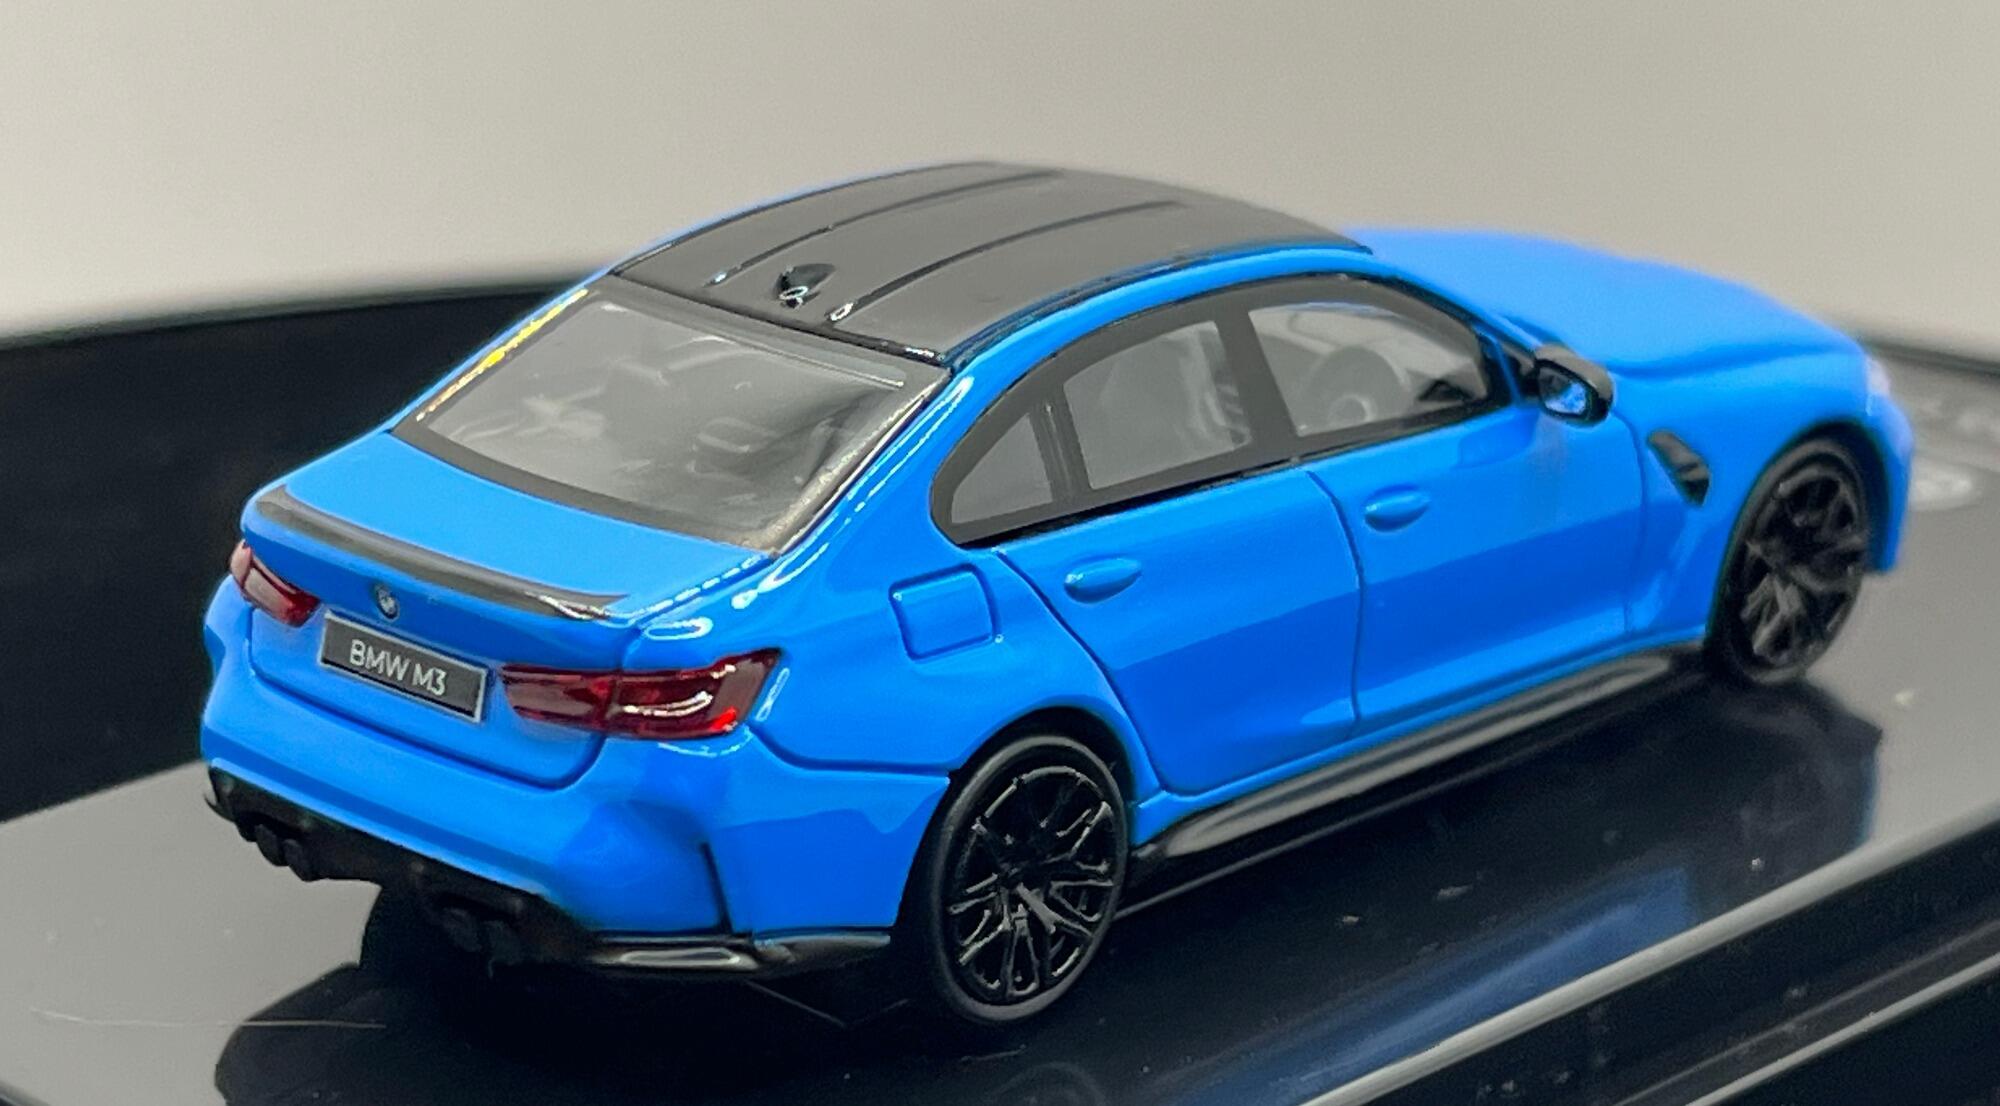 BMW M3 G80 2020 in Miami blue, 1:64 scale diecast car model car from Paragon Models, 65203, approx 7.5cm long